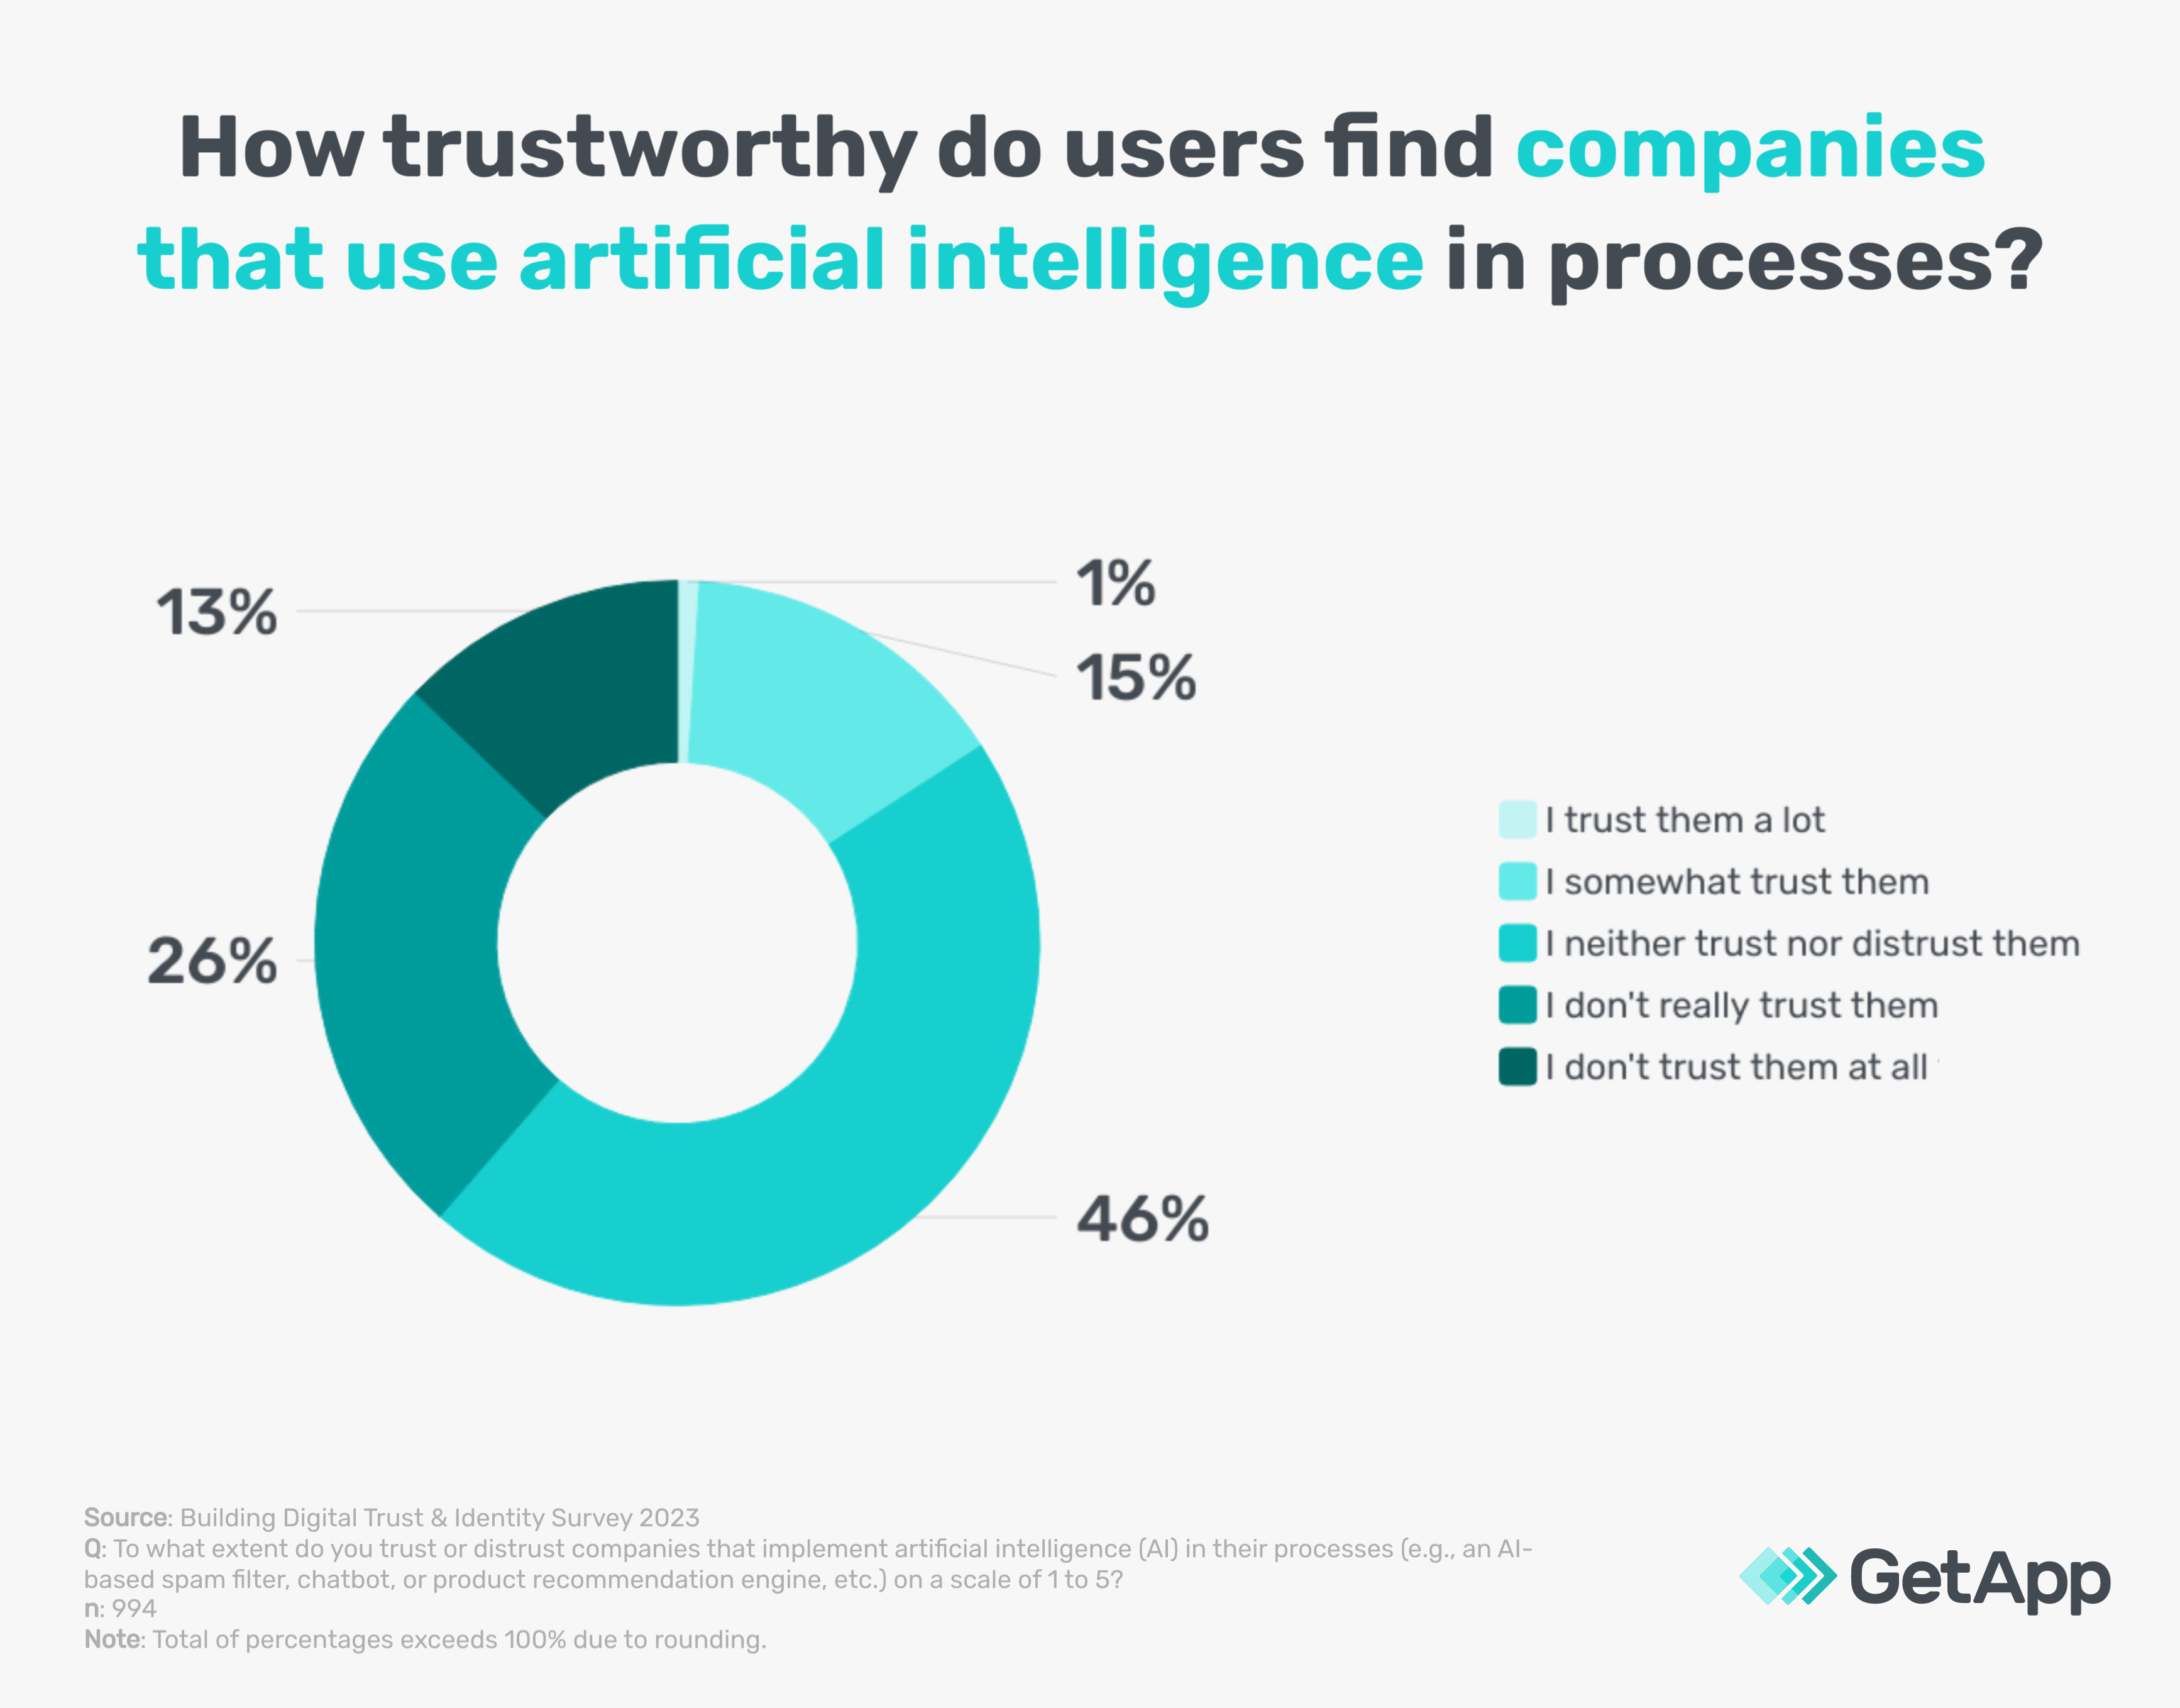 digital reputation and consumer trust for brands using AI